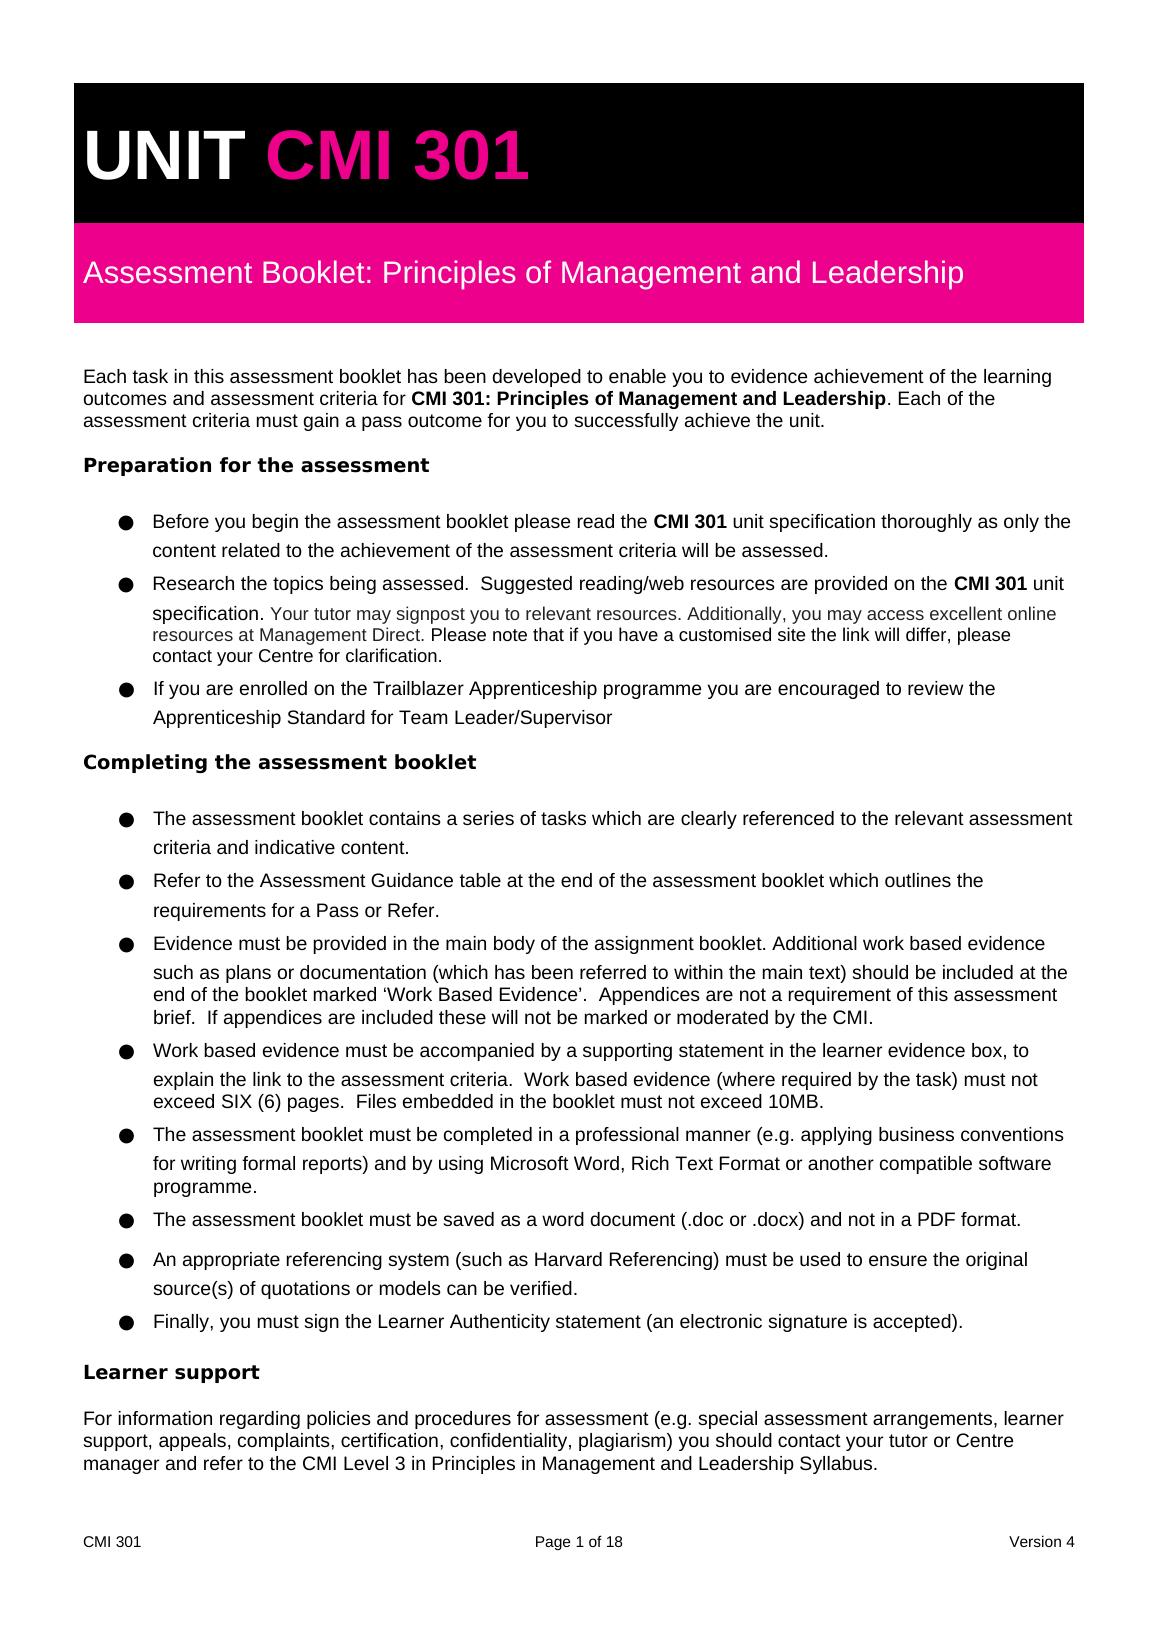 Assessment Booklet: Principles of Management and Leadership_1